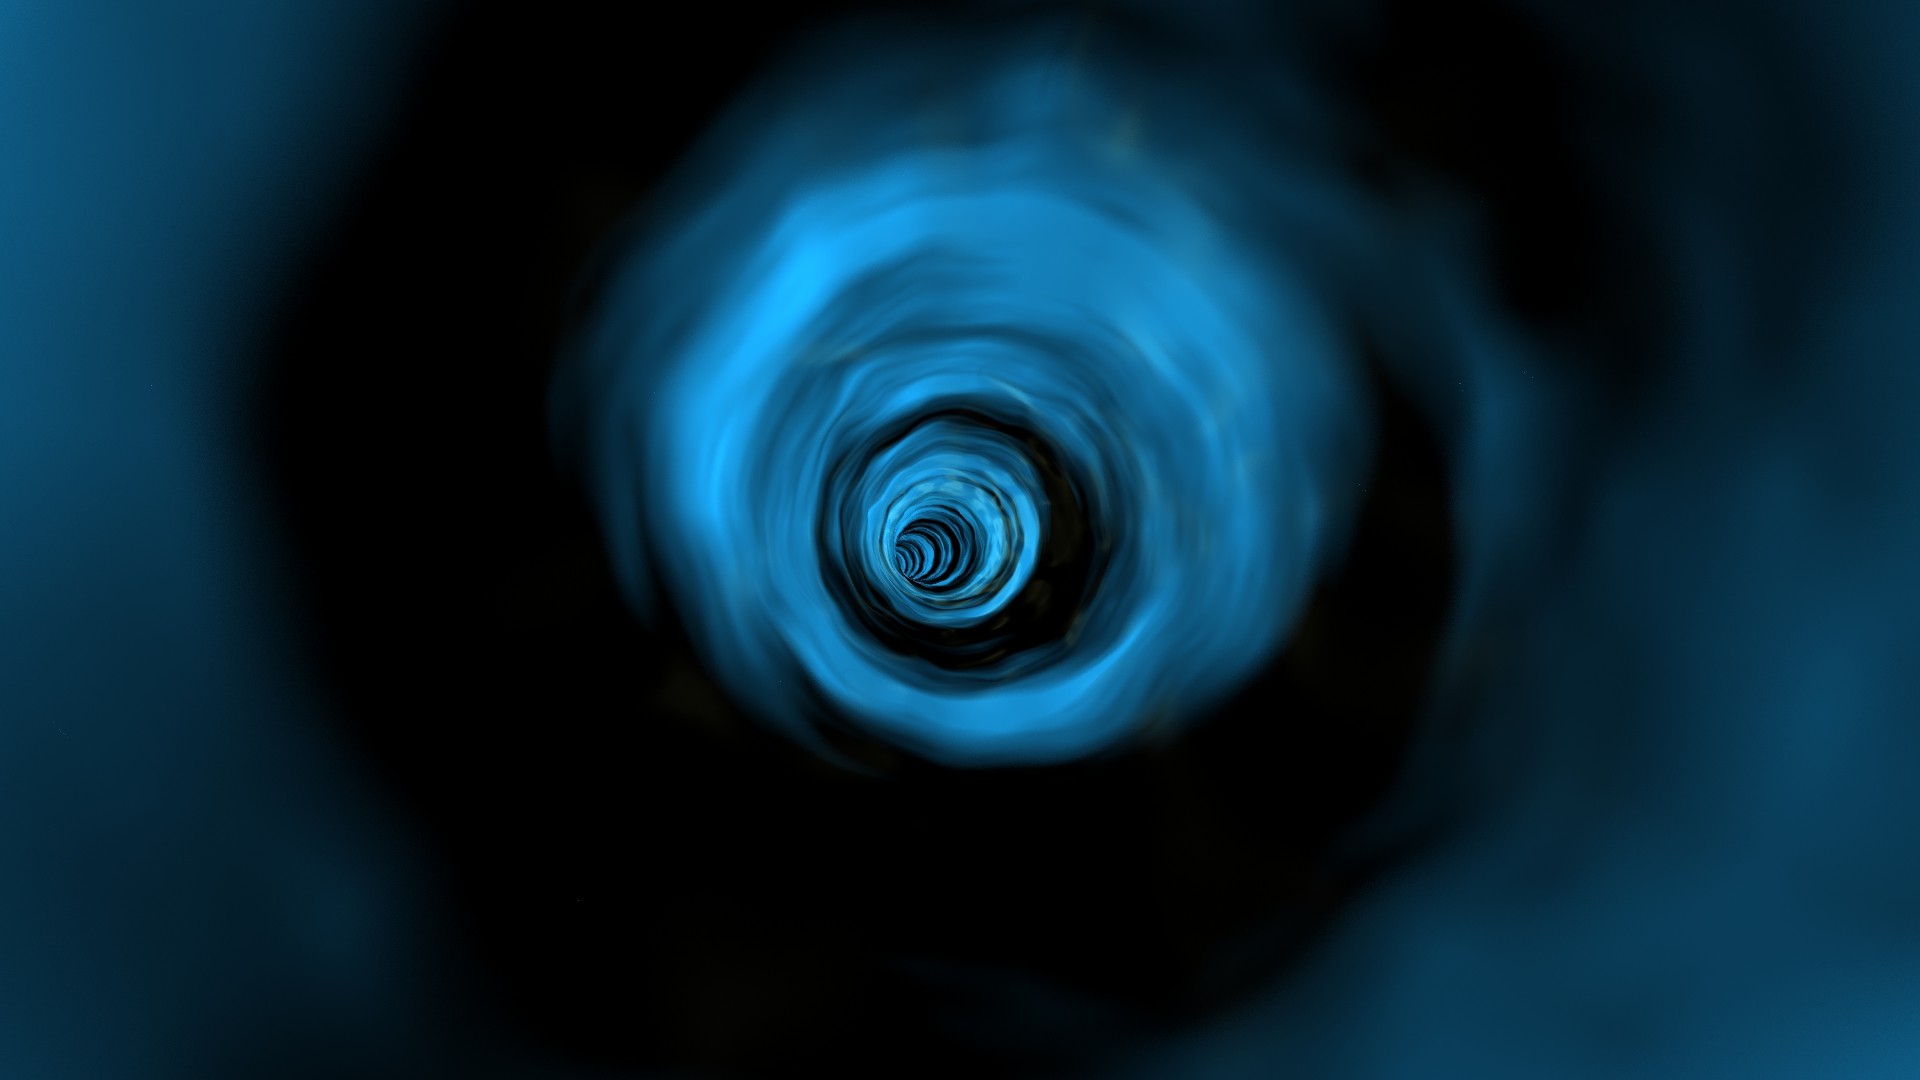 1920x1080 Actually looks a bit like the Time Vortex from Doctor Who looking at .